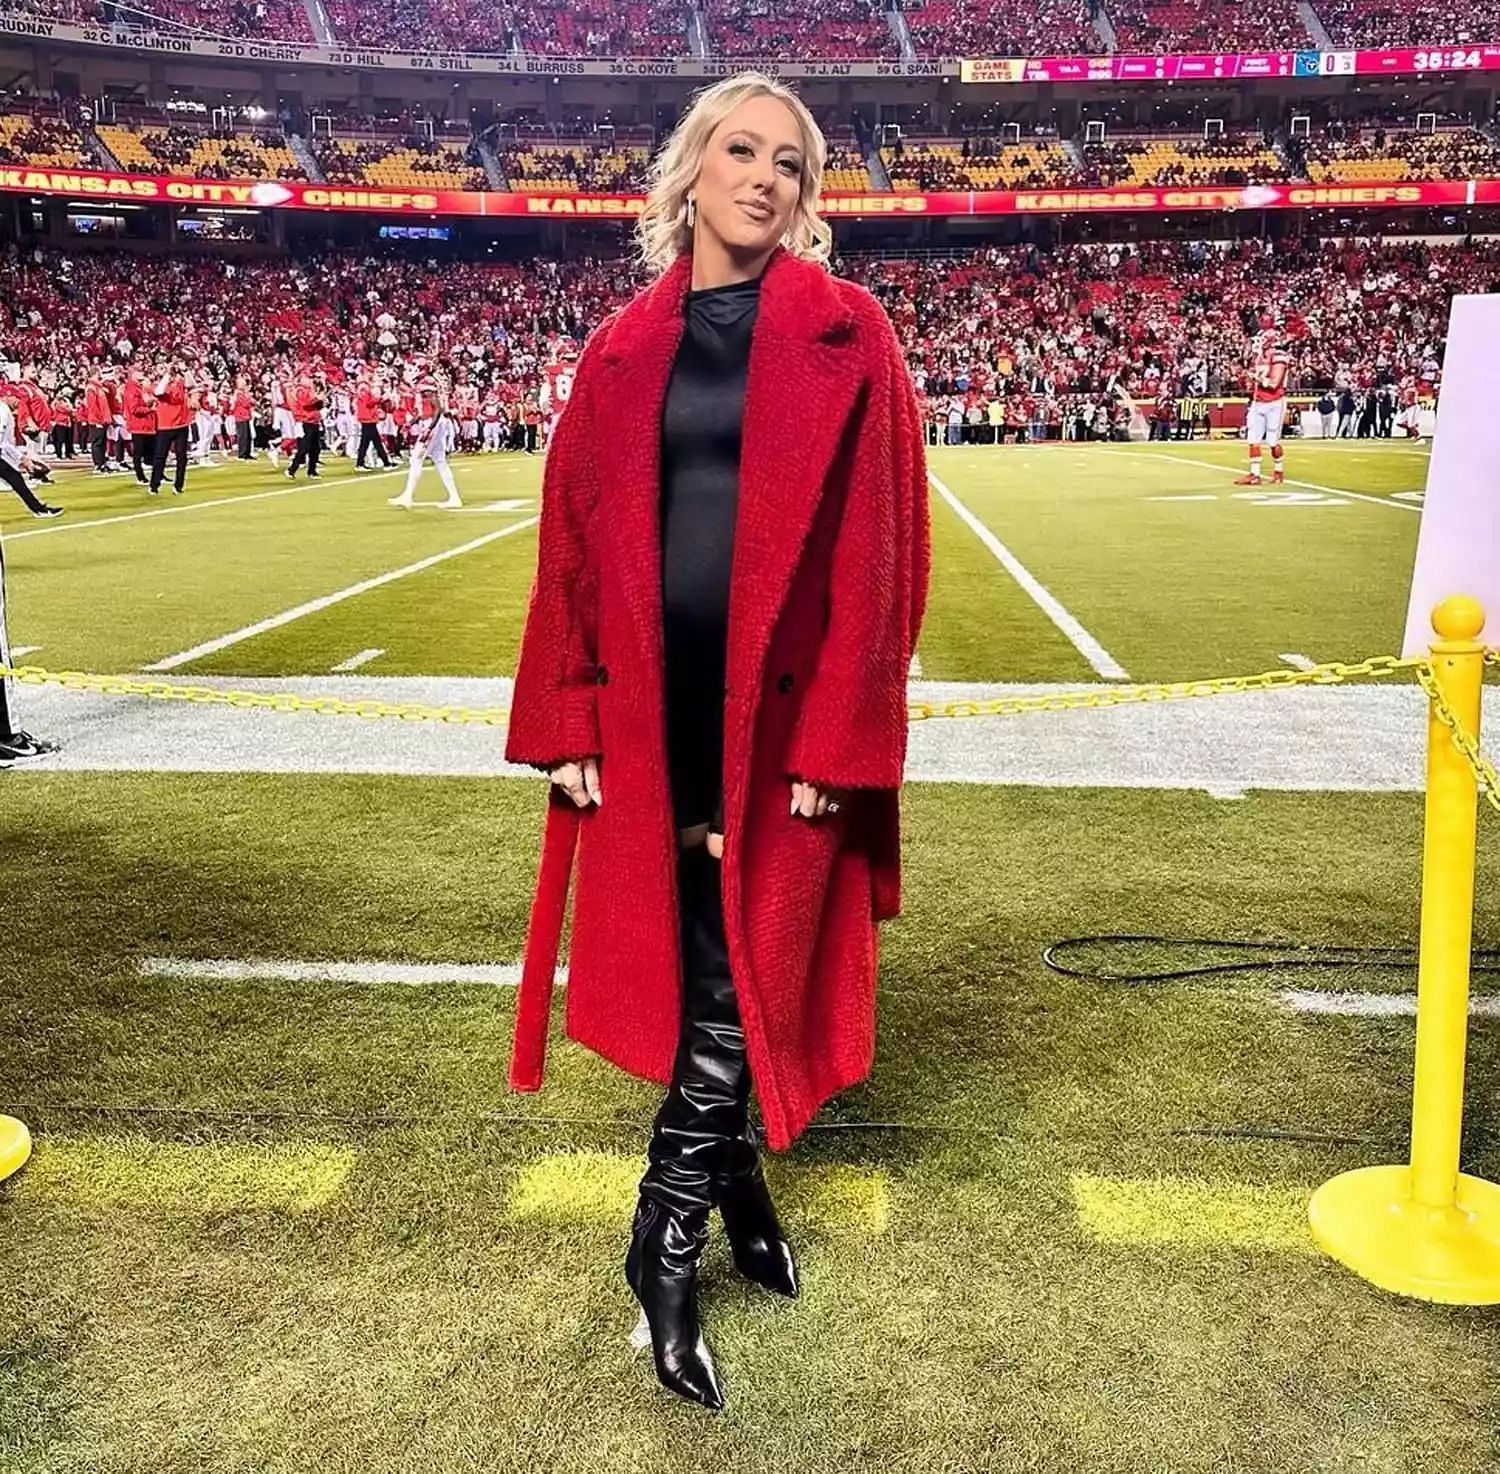 Brittany wears identical red coat in November 2022. (Image credit: Brittany Mahomes&#039; Ig account.)